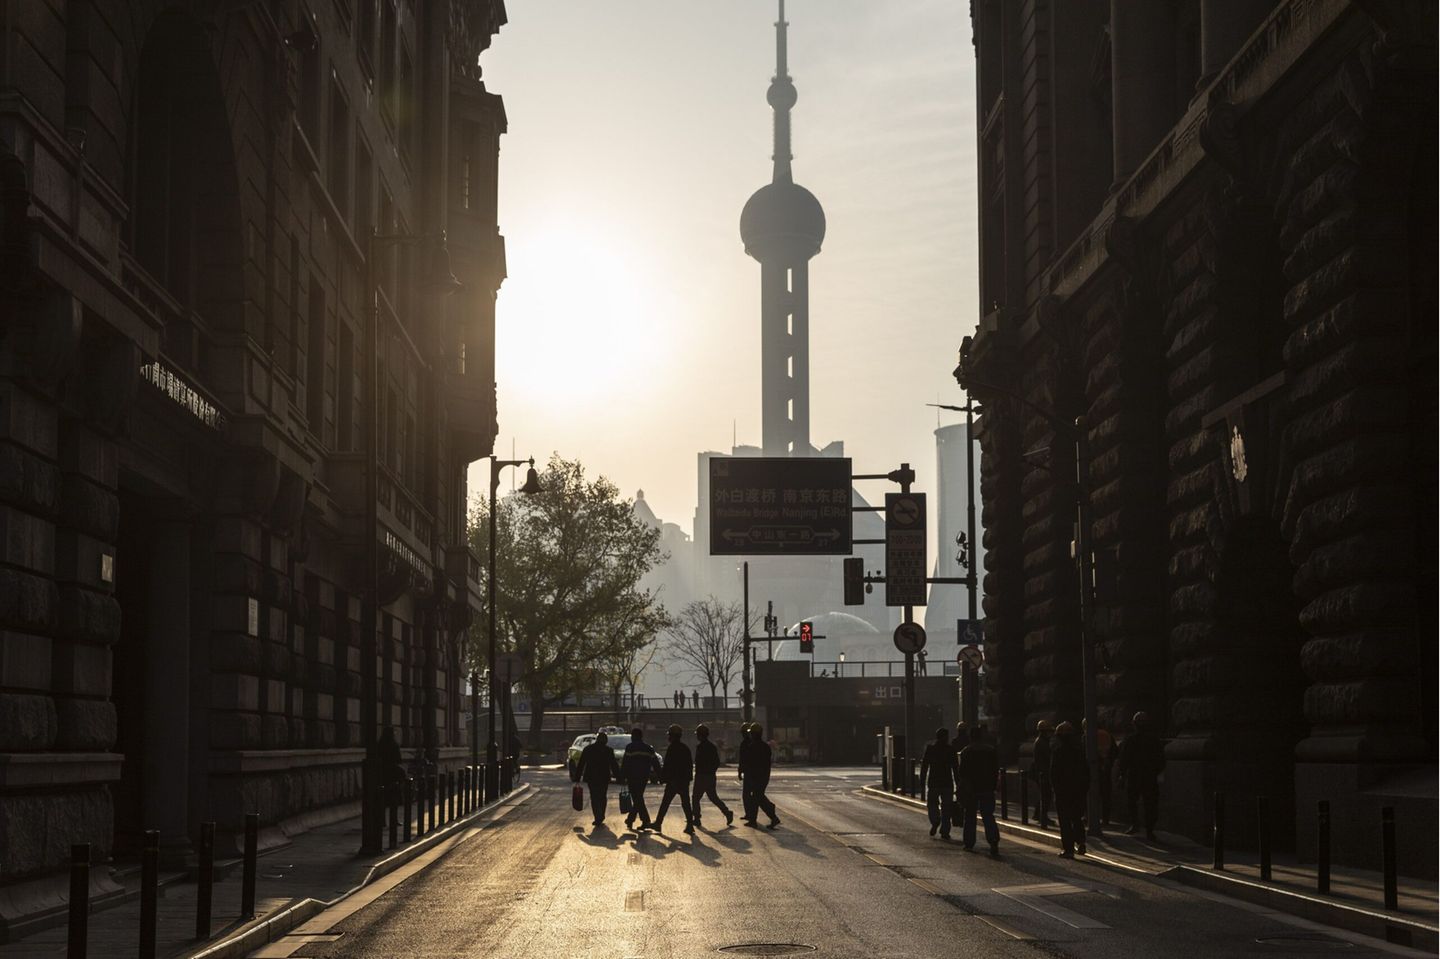 Construction workers cross a road near the Bund in Shanghai, China, on Saturday, April 10, 2021. Photographer: Qilai Shen/Bloomberg